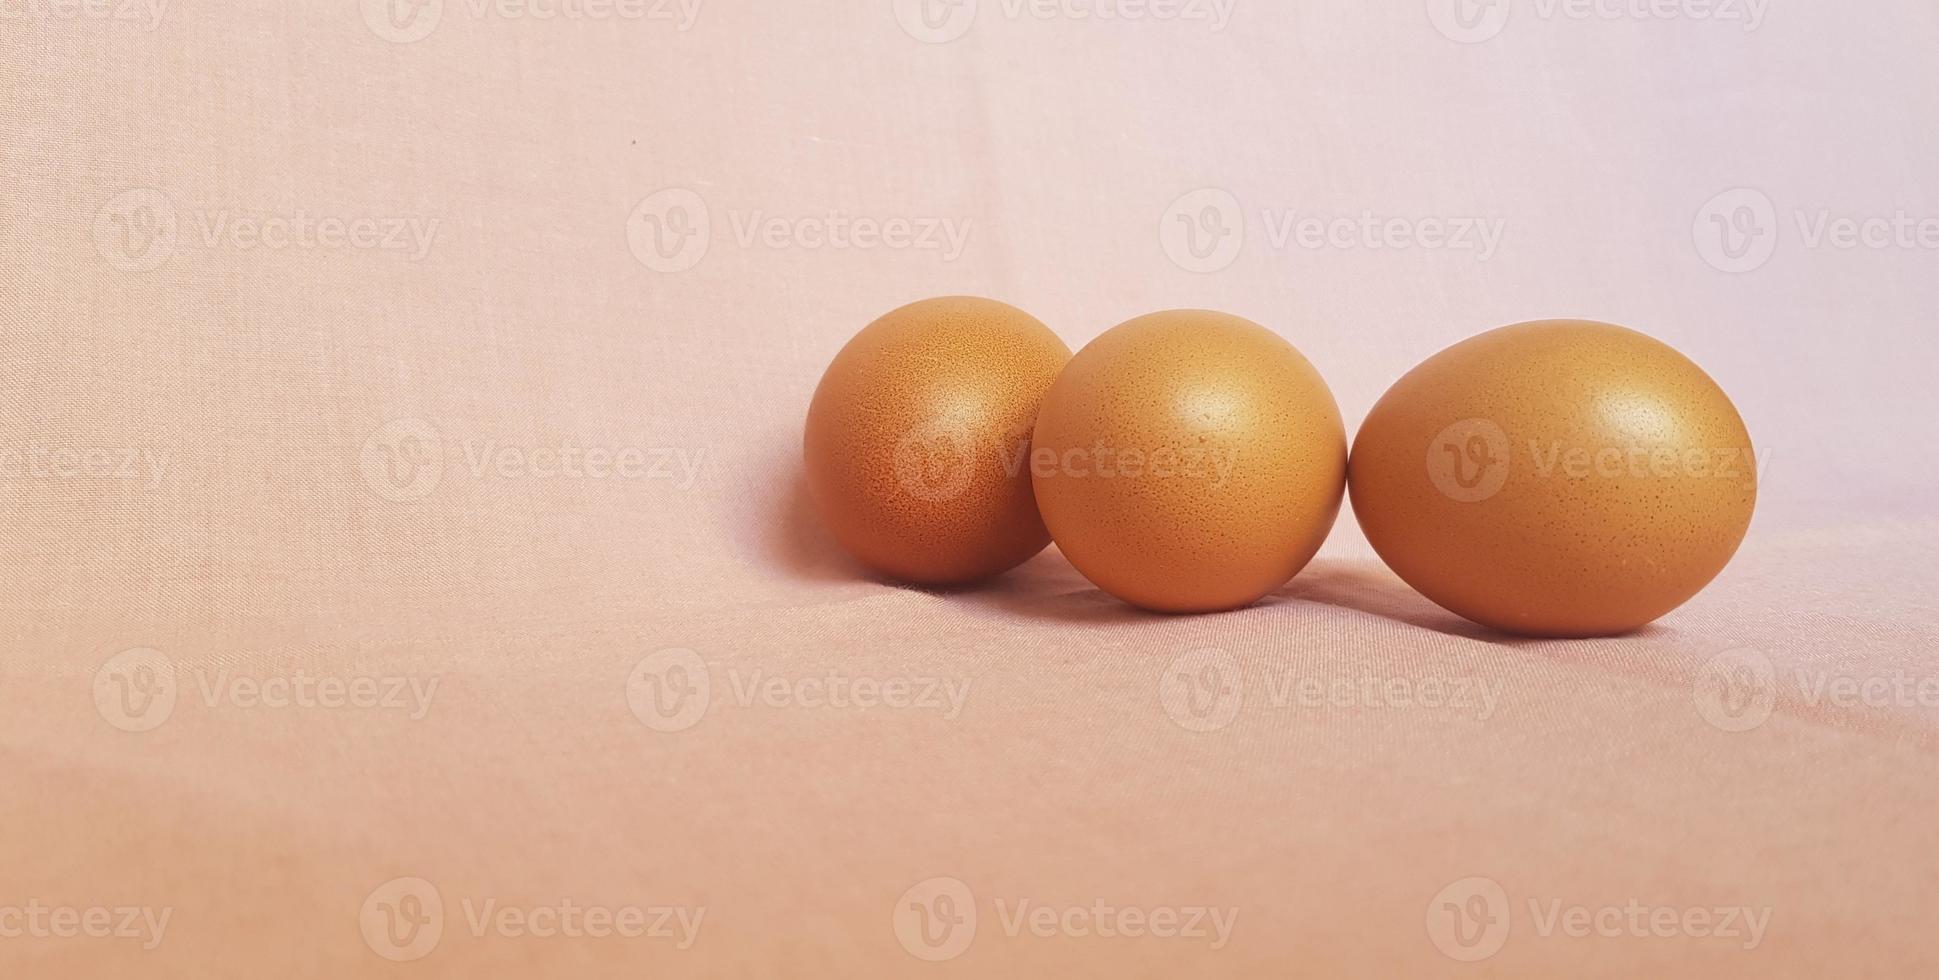 Eggs on a pink cloth. photo